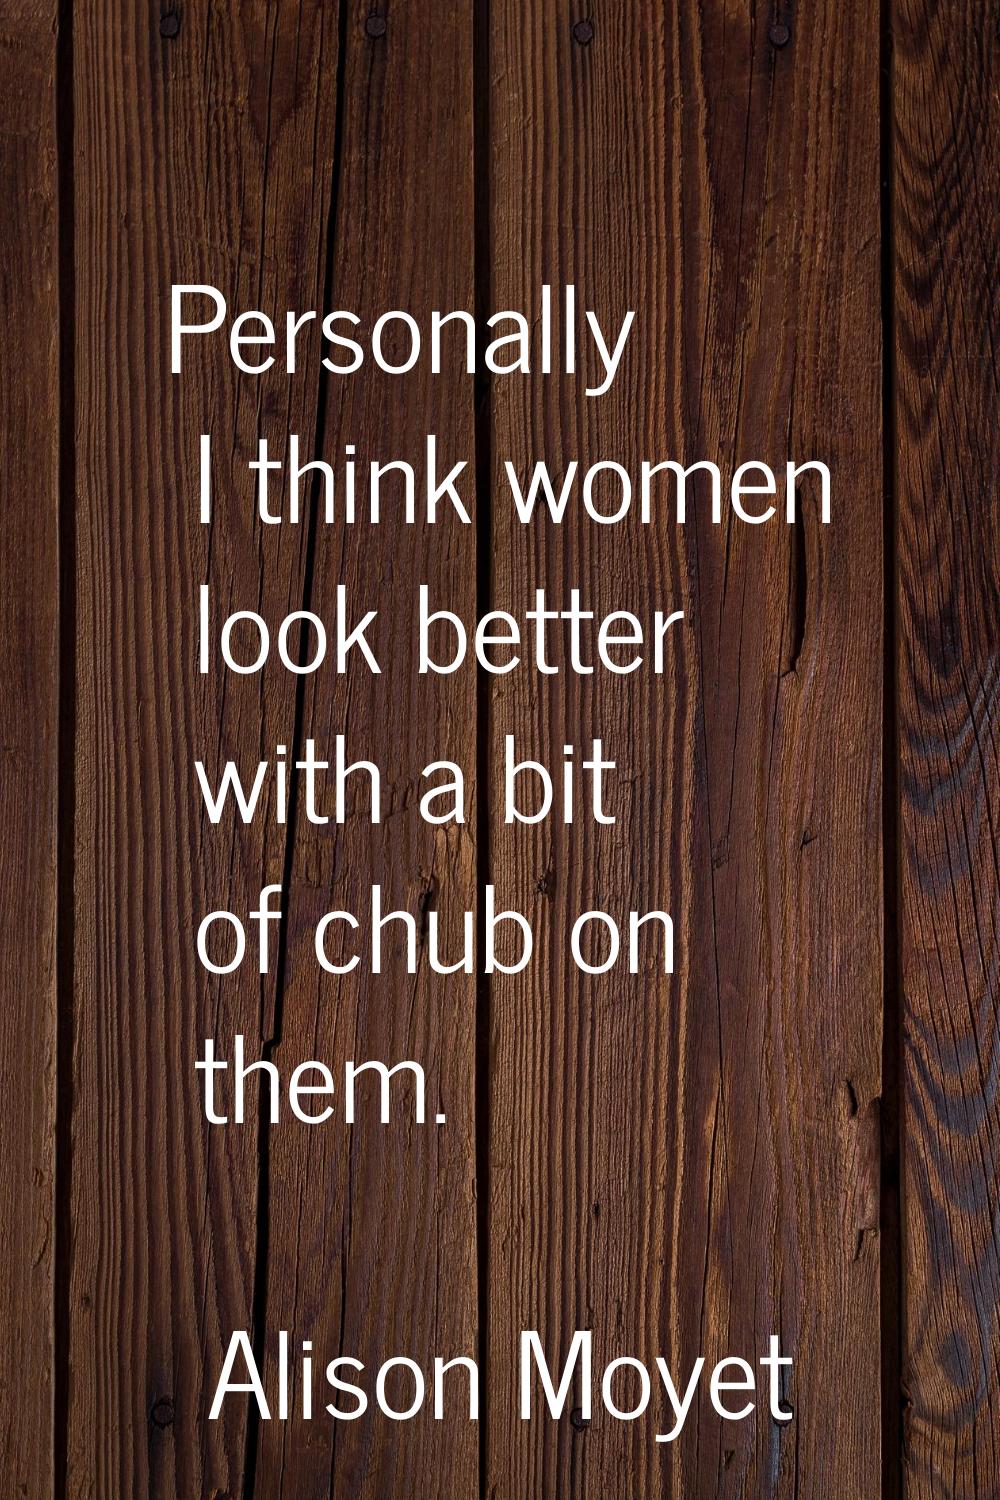 Personally I think women look better with a bit of chub on them.